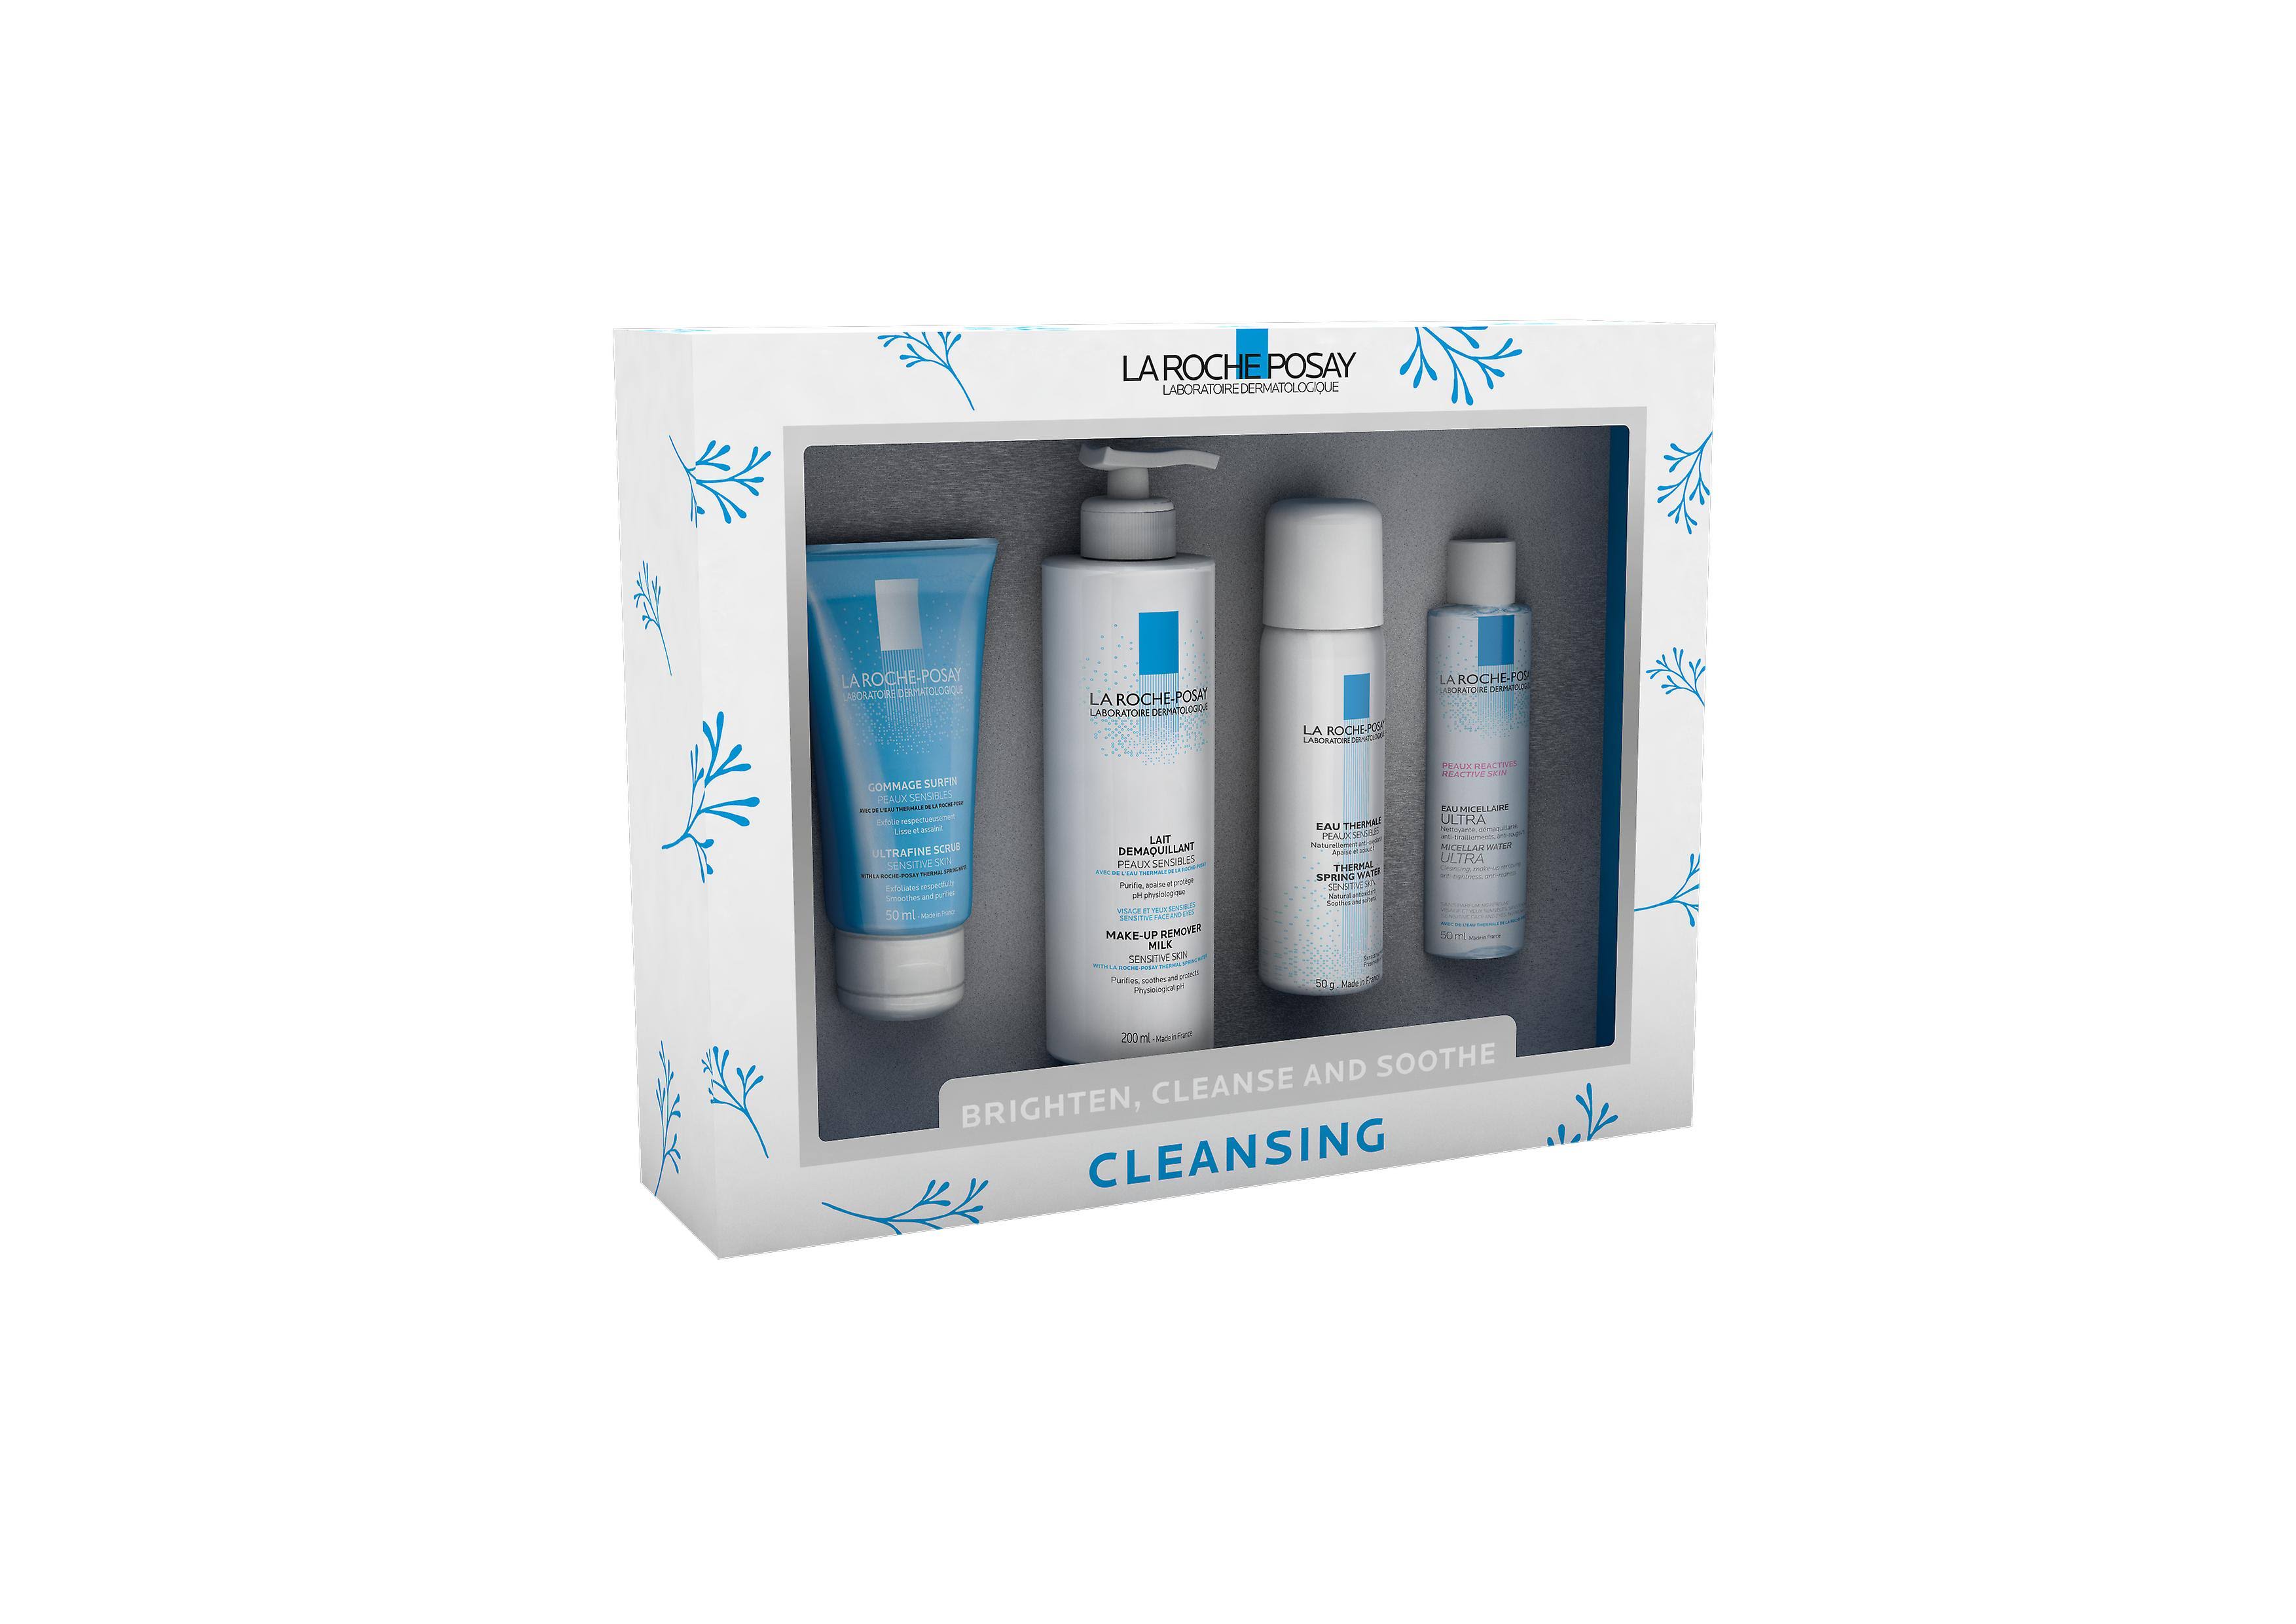 La Roche-Posay Brighten, Cleanse and Soothe Gift Set